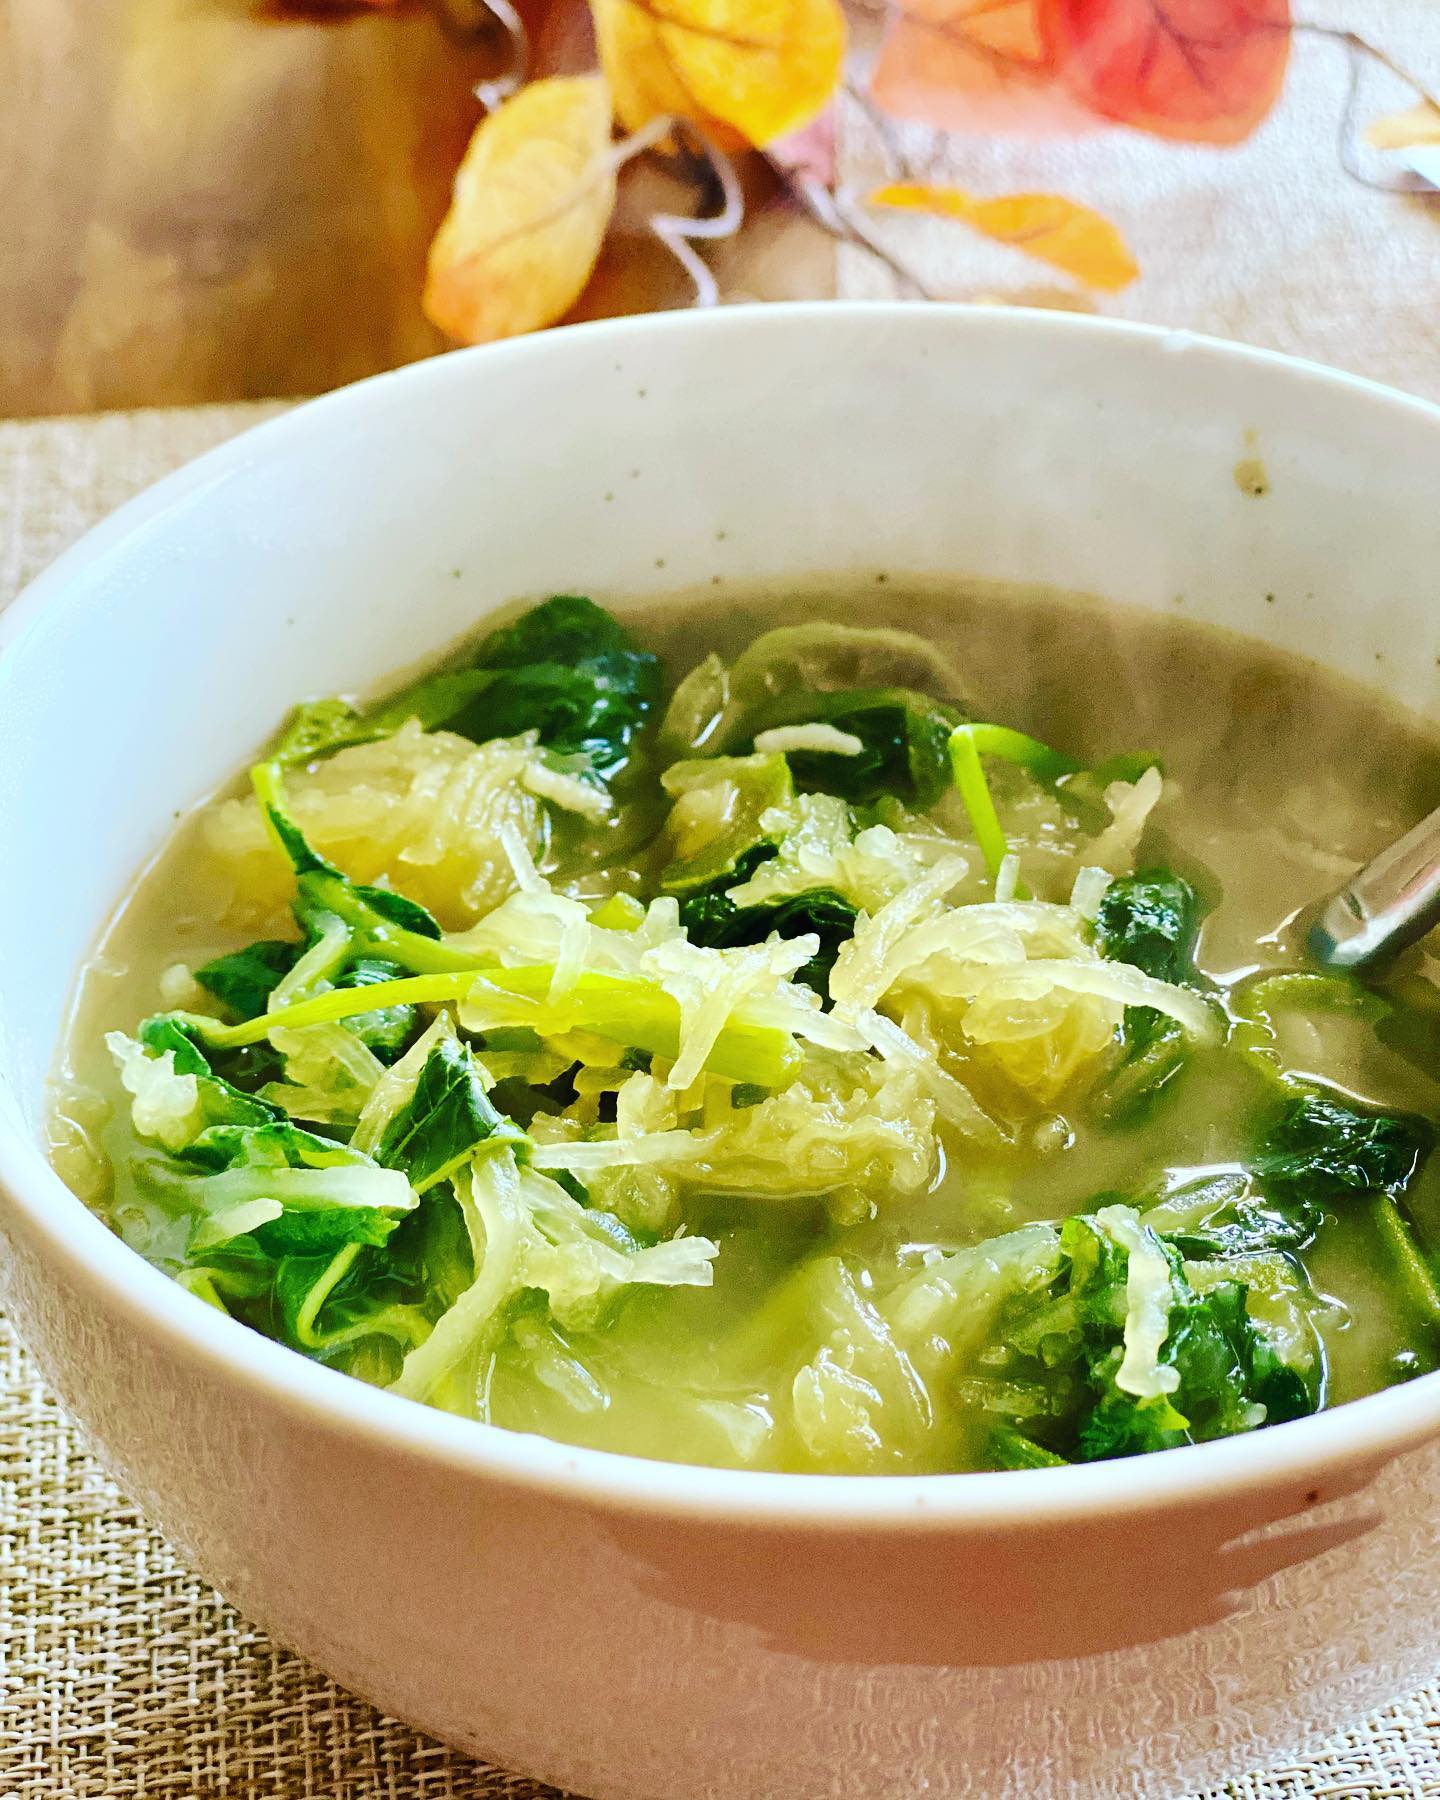 Spaghetti squash and greens (yam leaves) in nutritious broth